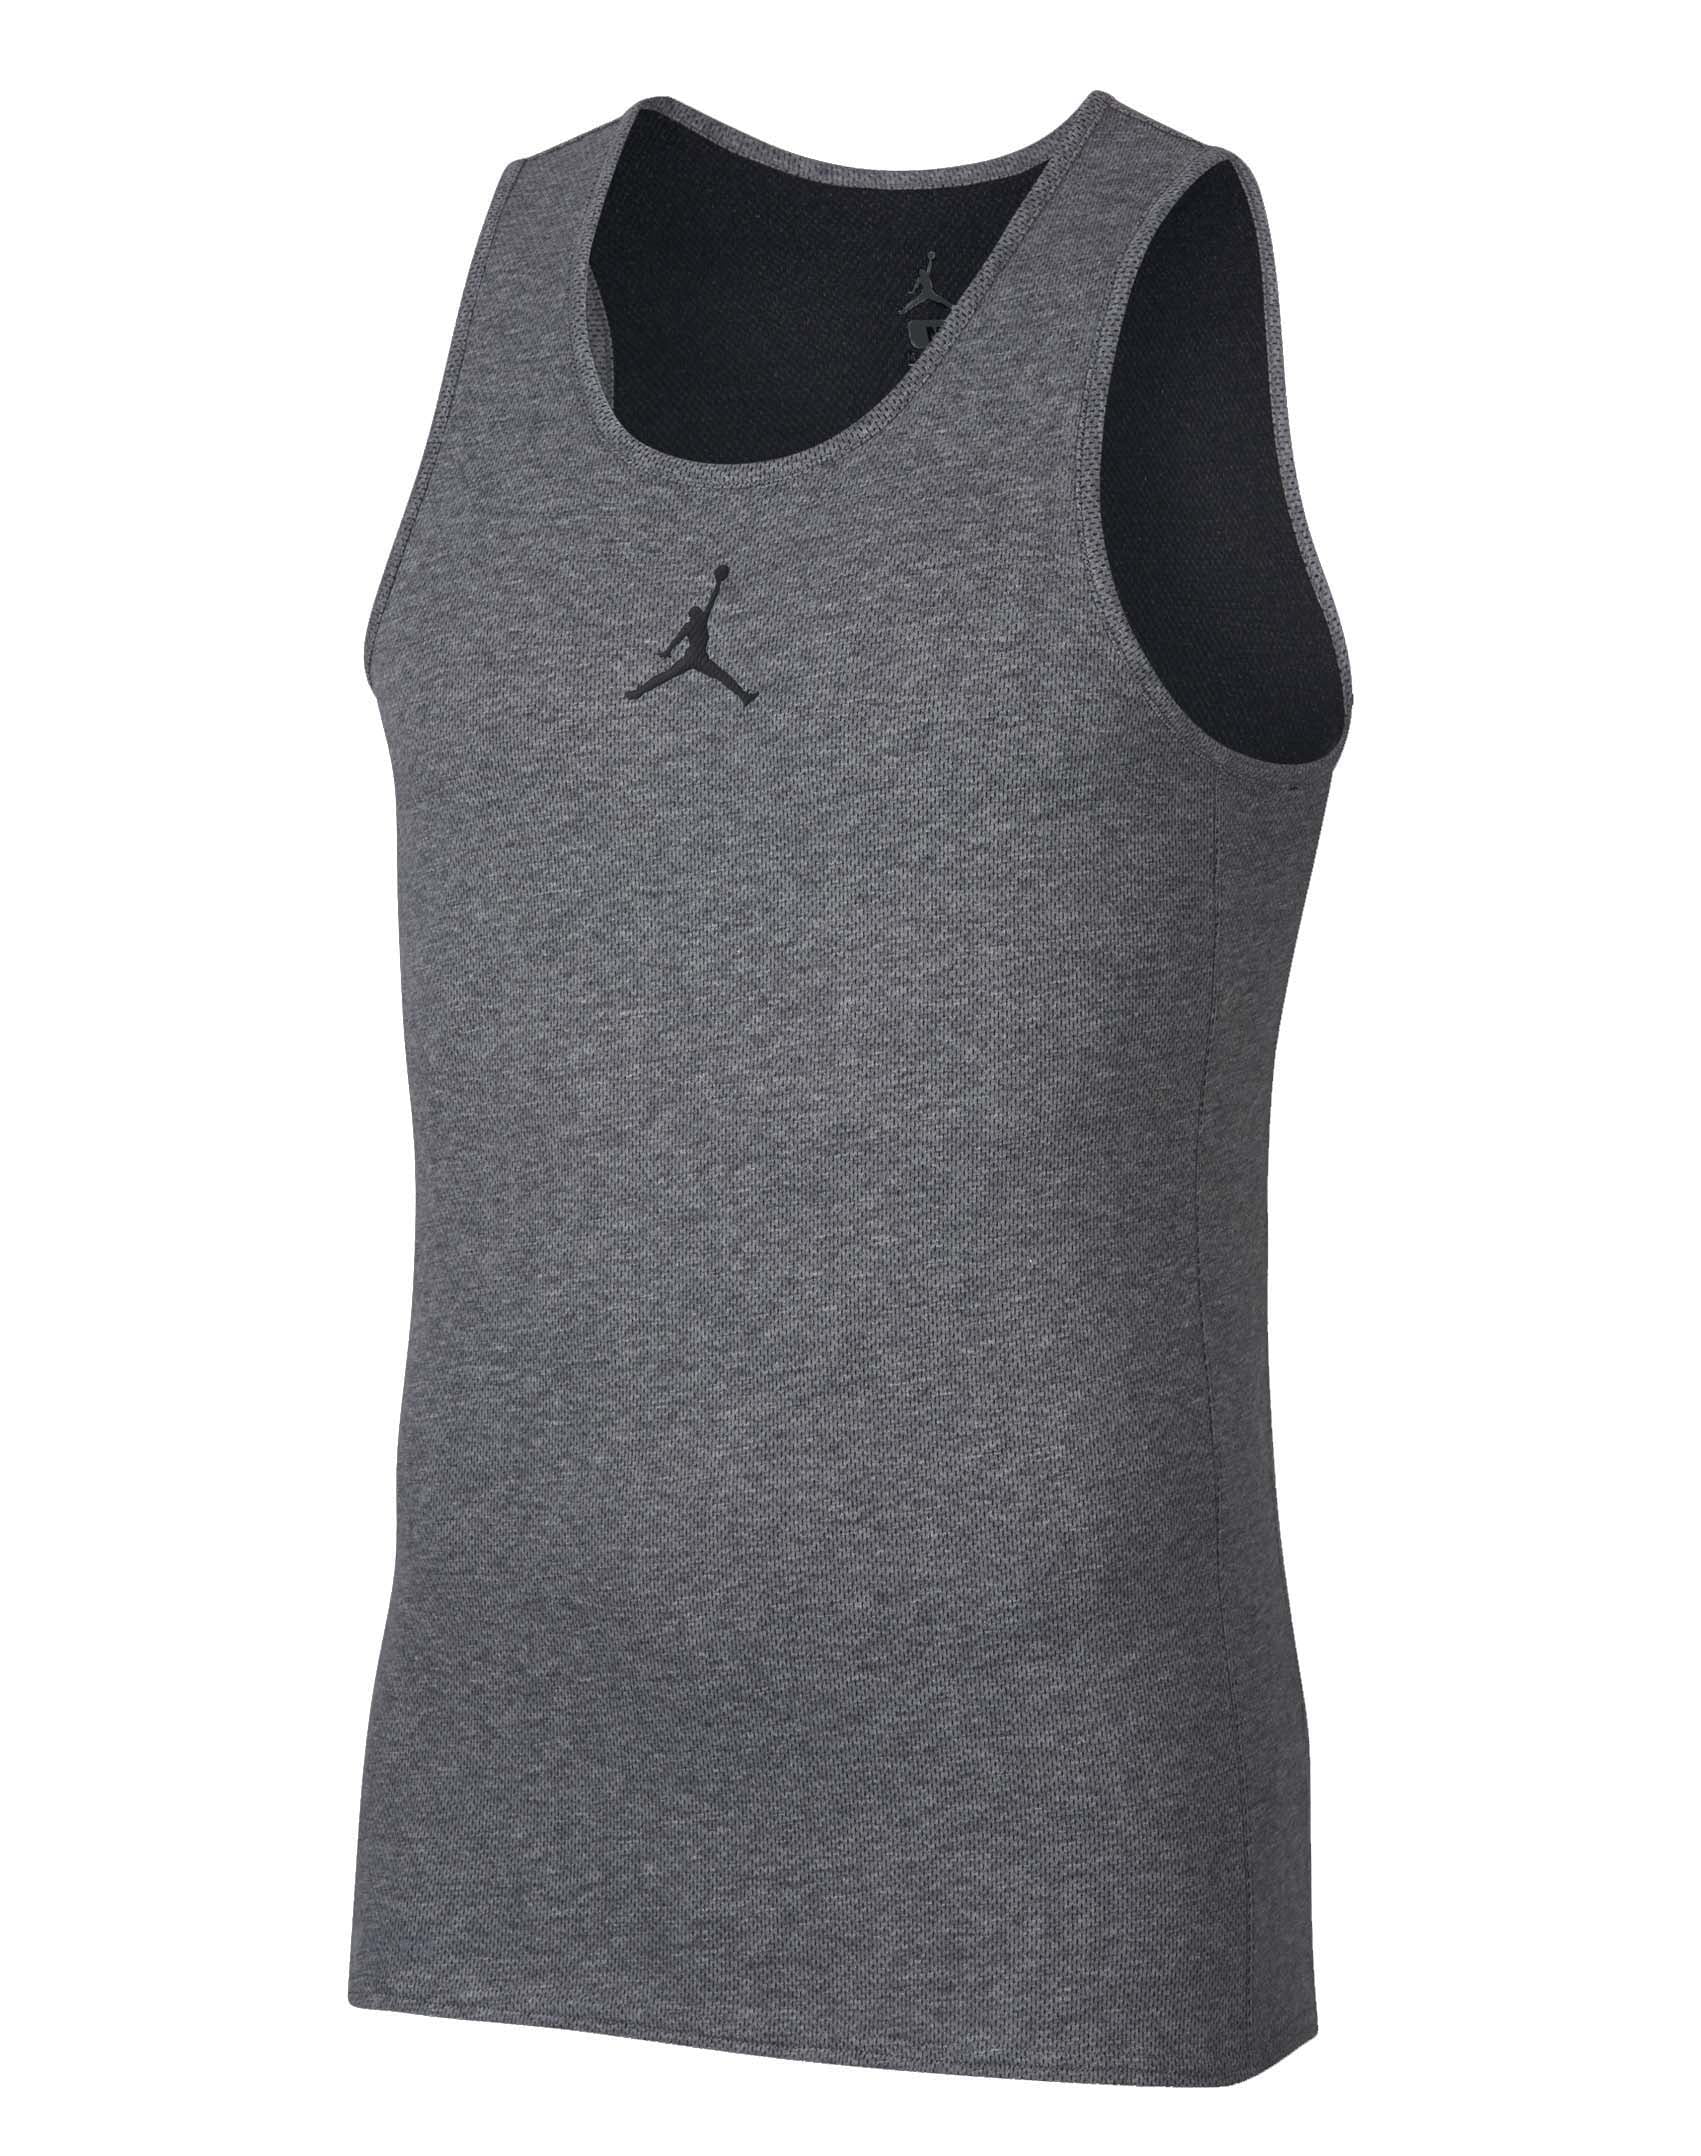 NEW Mens Tank Top Shirt Size Large L Gray Casual Gym Sports Basketball Running 